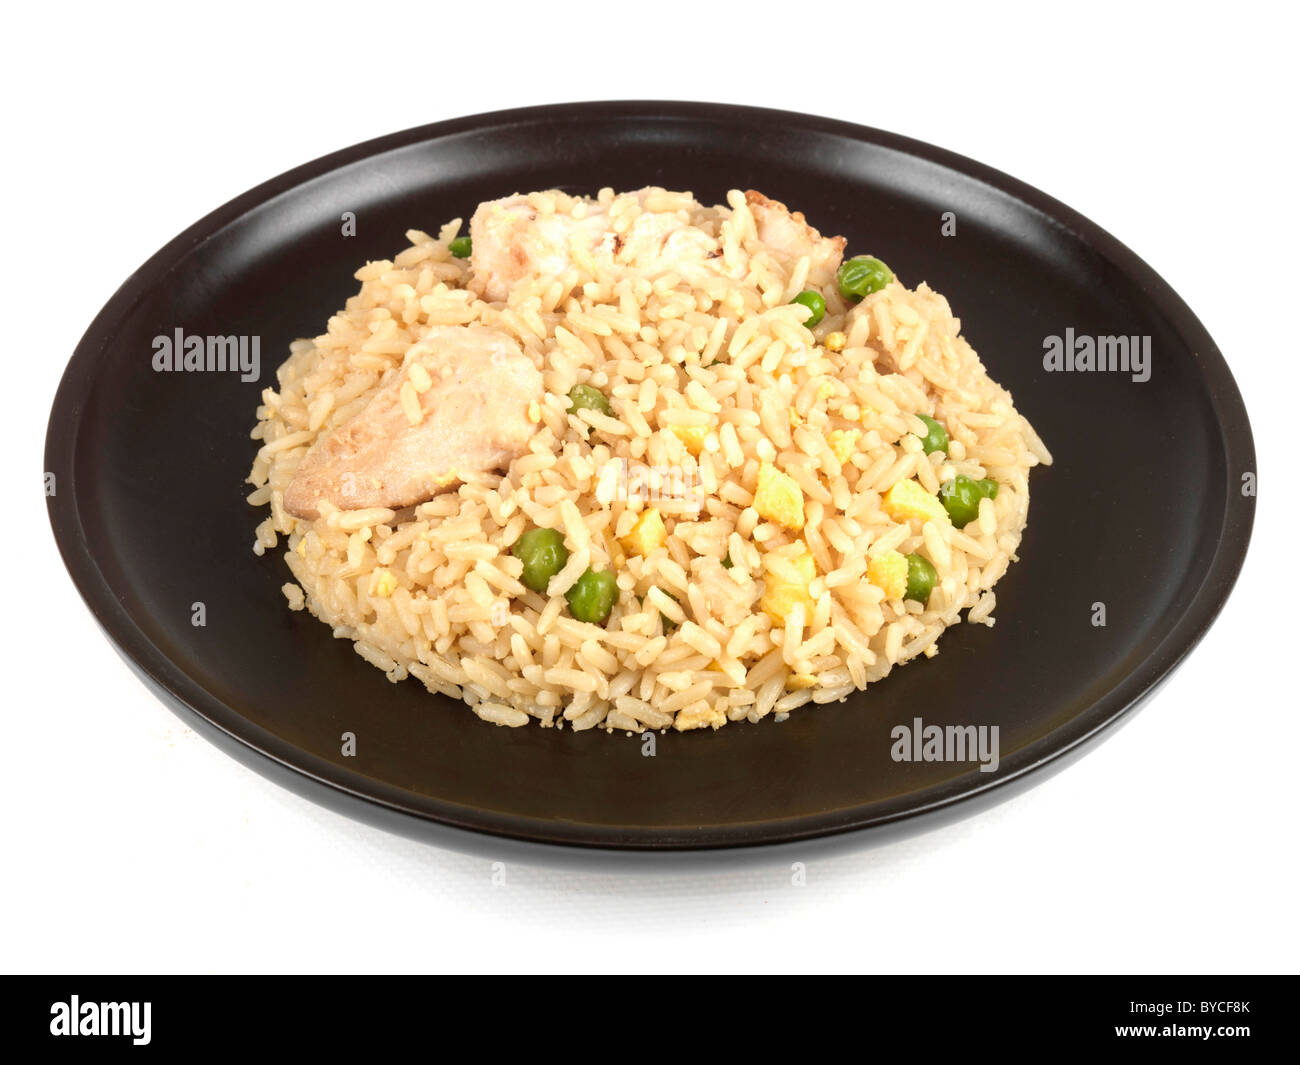 Fried rice Cut Out Stock Images & Pictures - Alamy